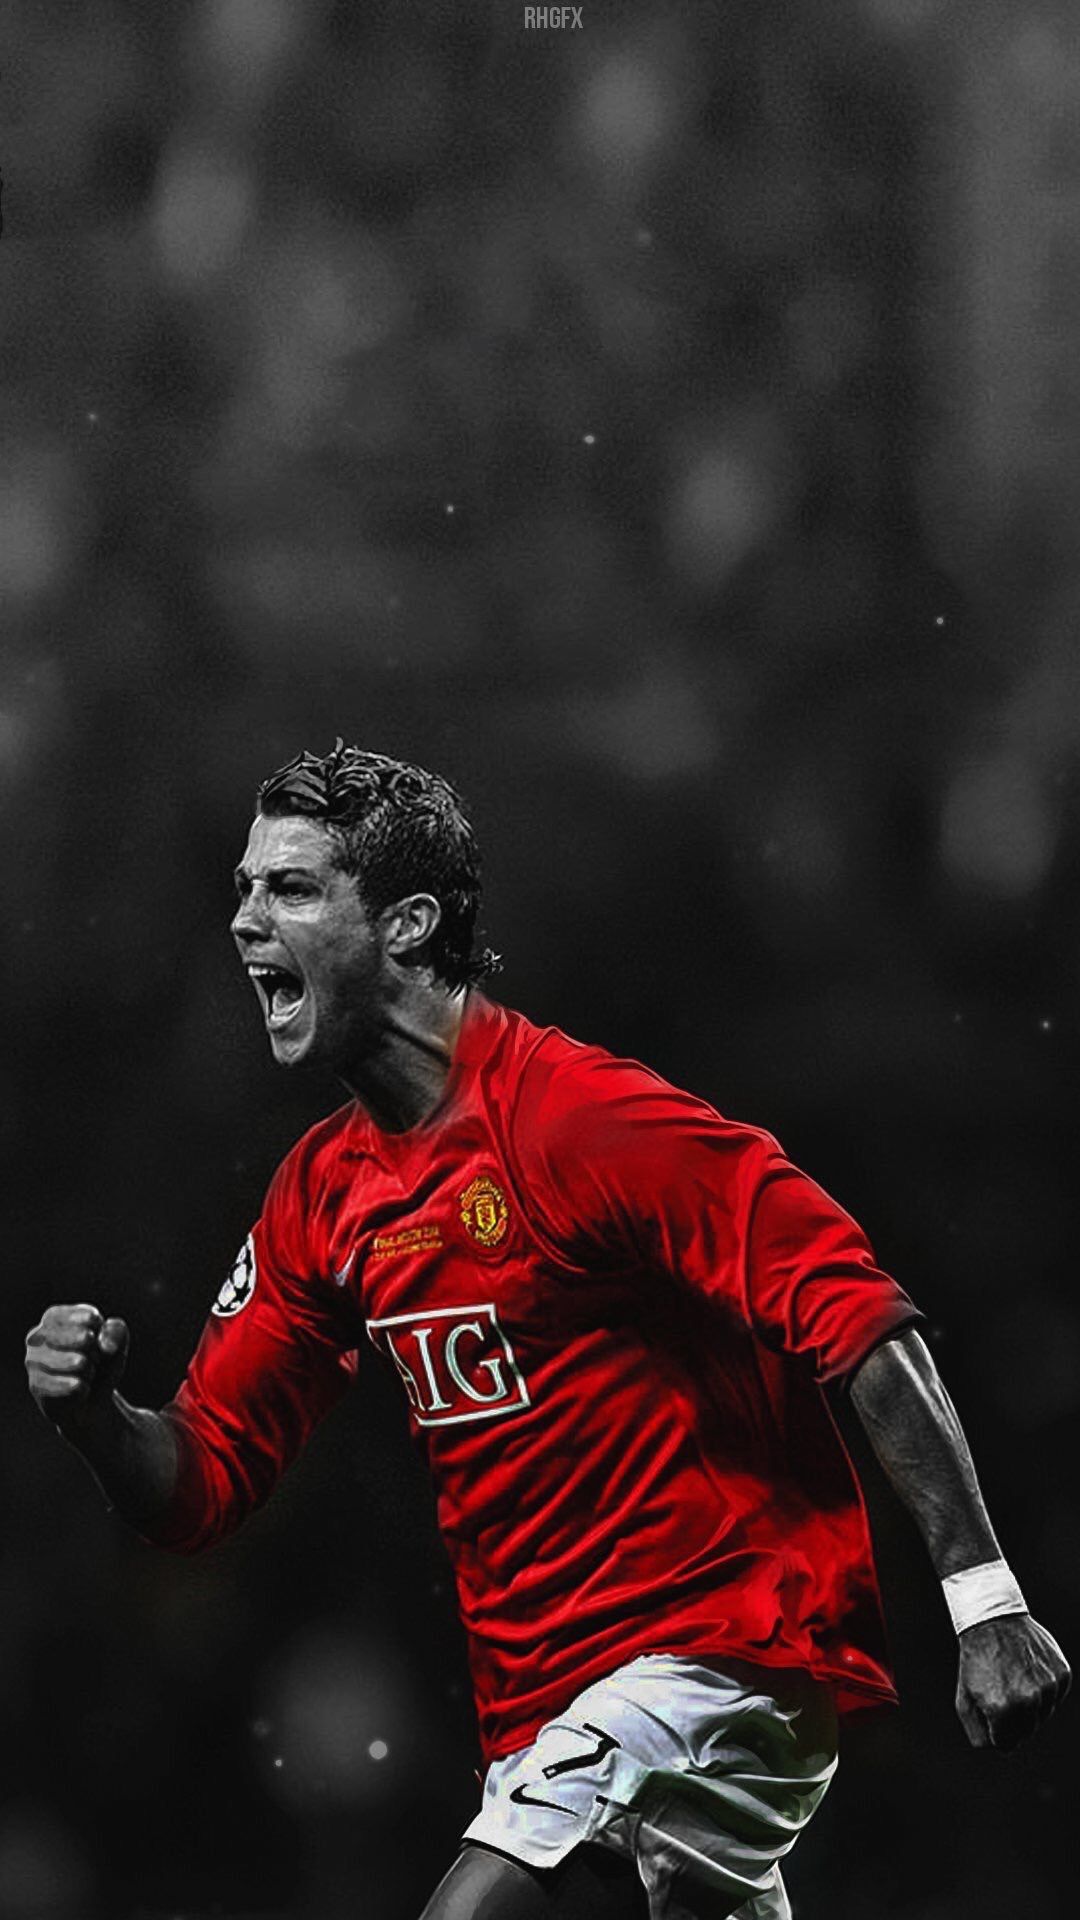 Best Manchester united iPhone HD Wallpapers - iLikeWallpaper